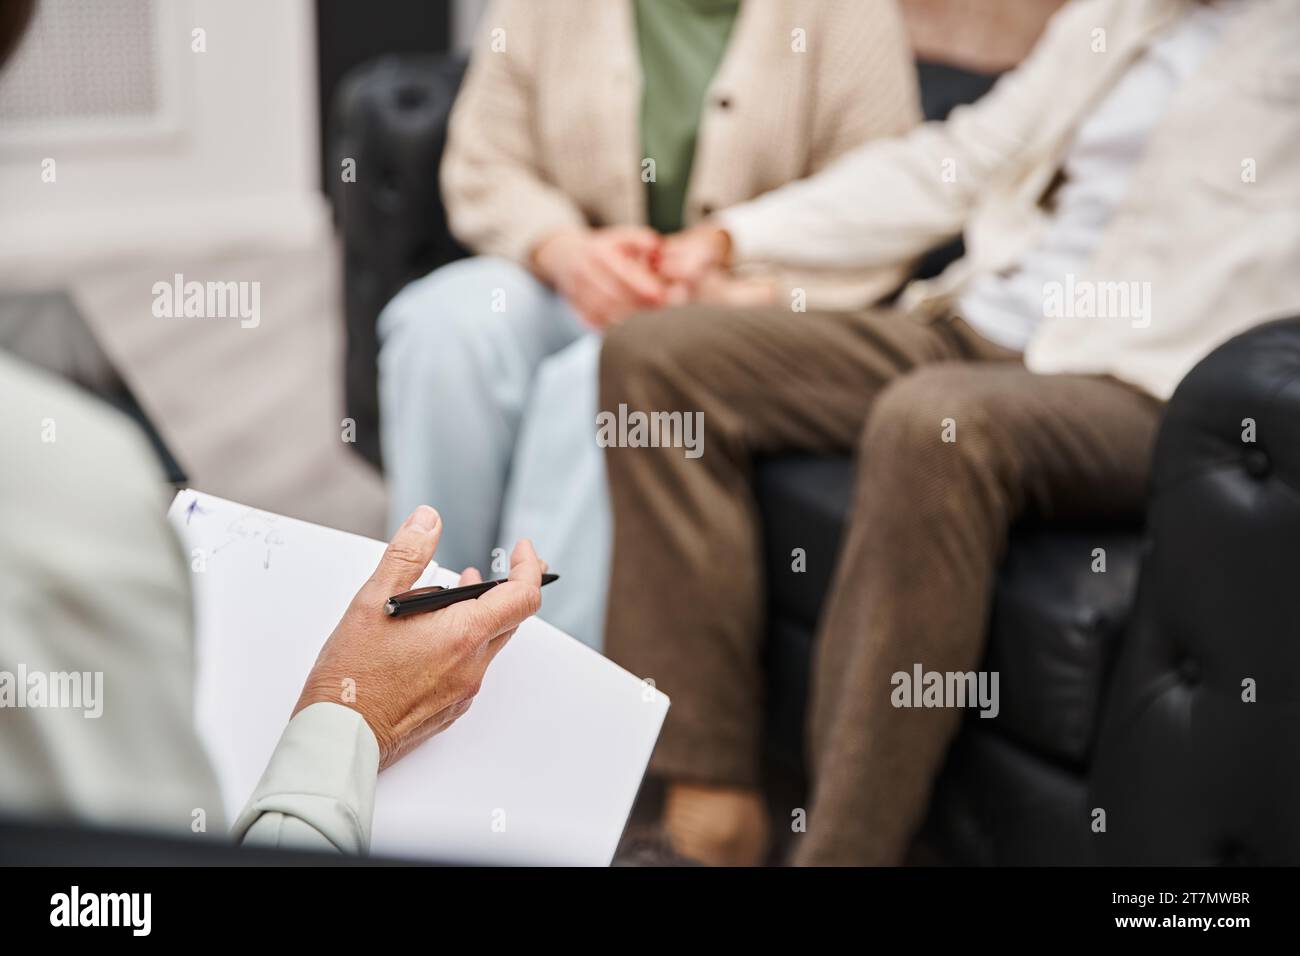 focus on psychologist  holding pen and blank notebook near married couple during appointment Stock Photo